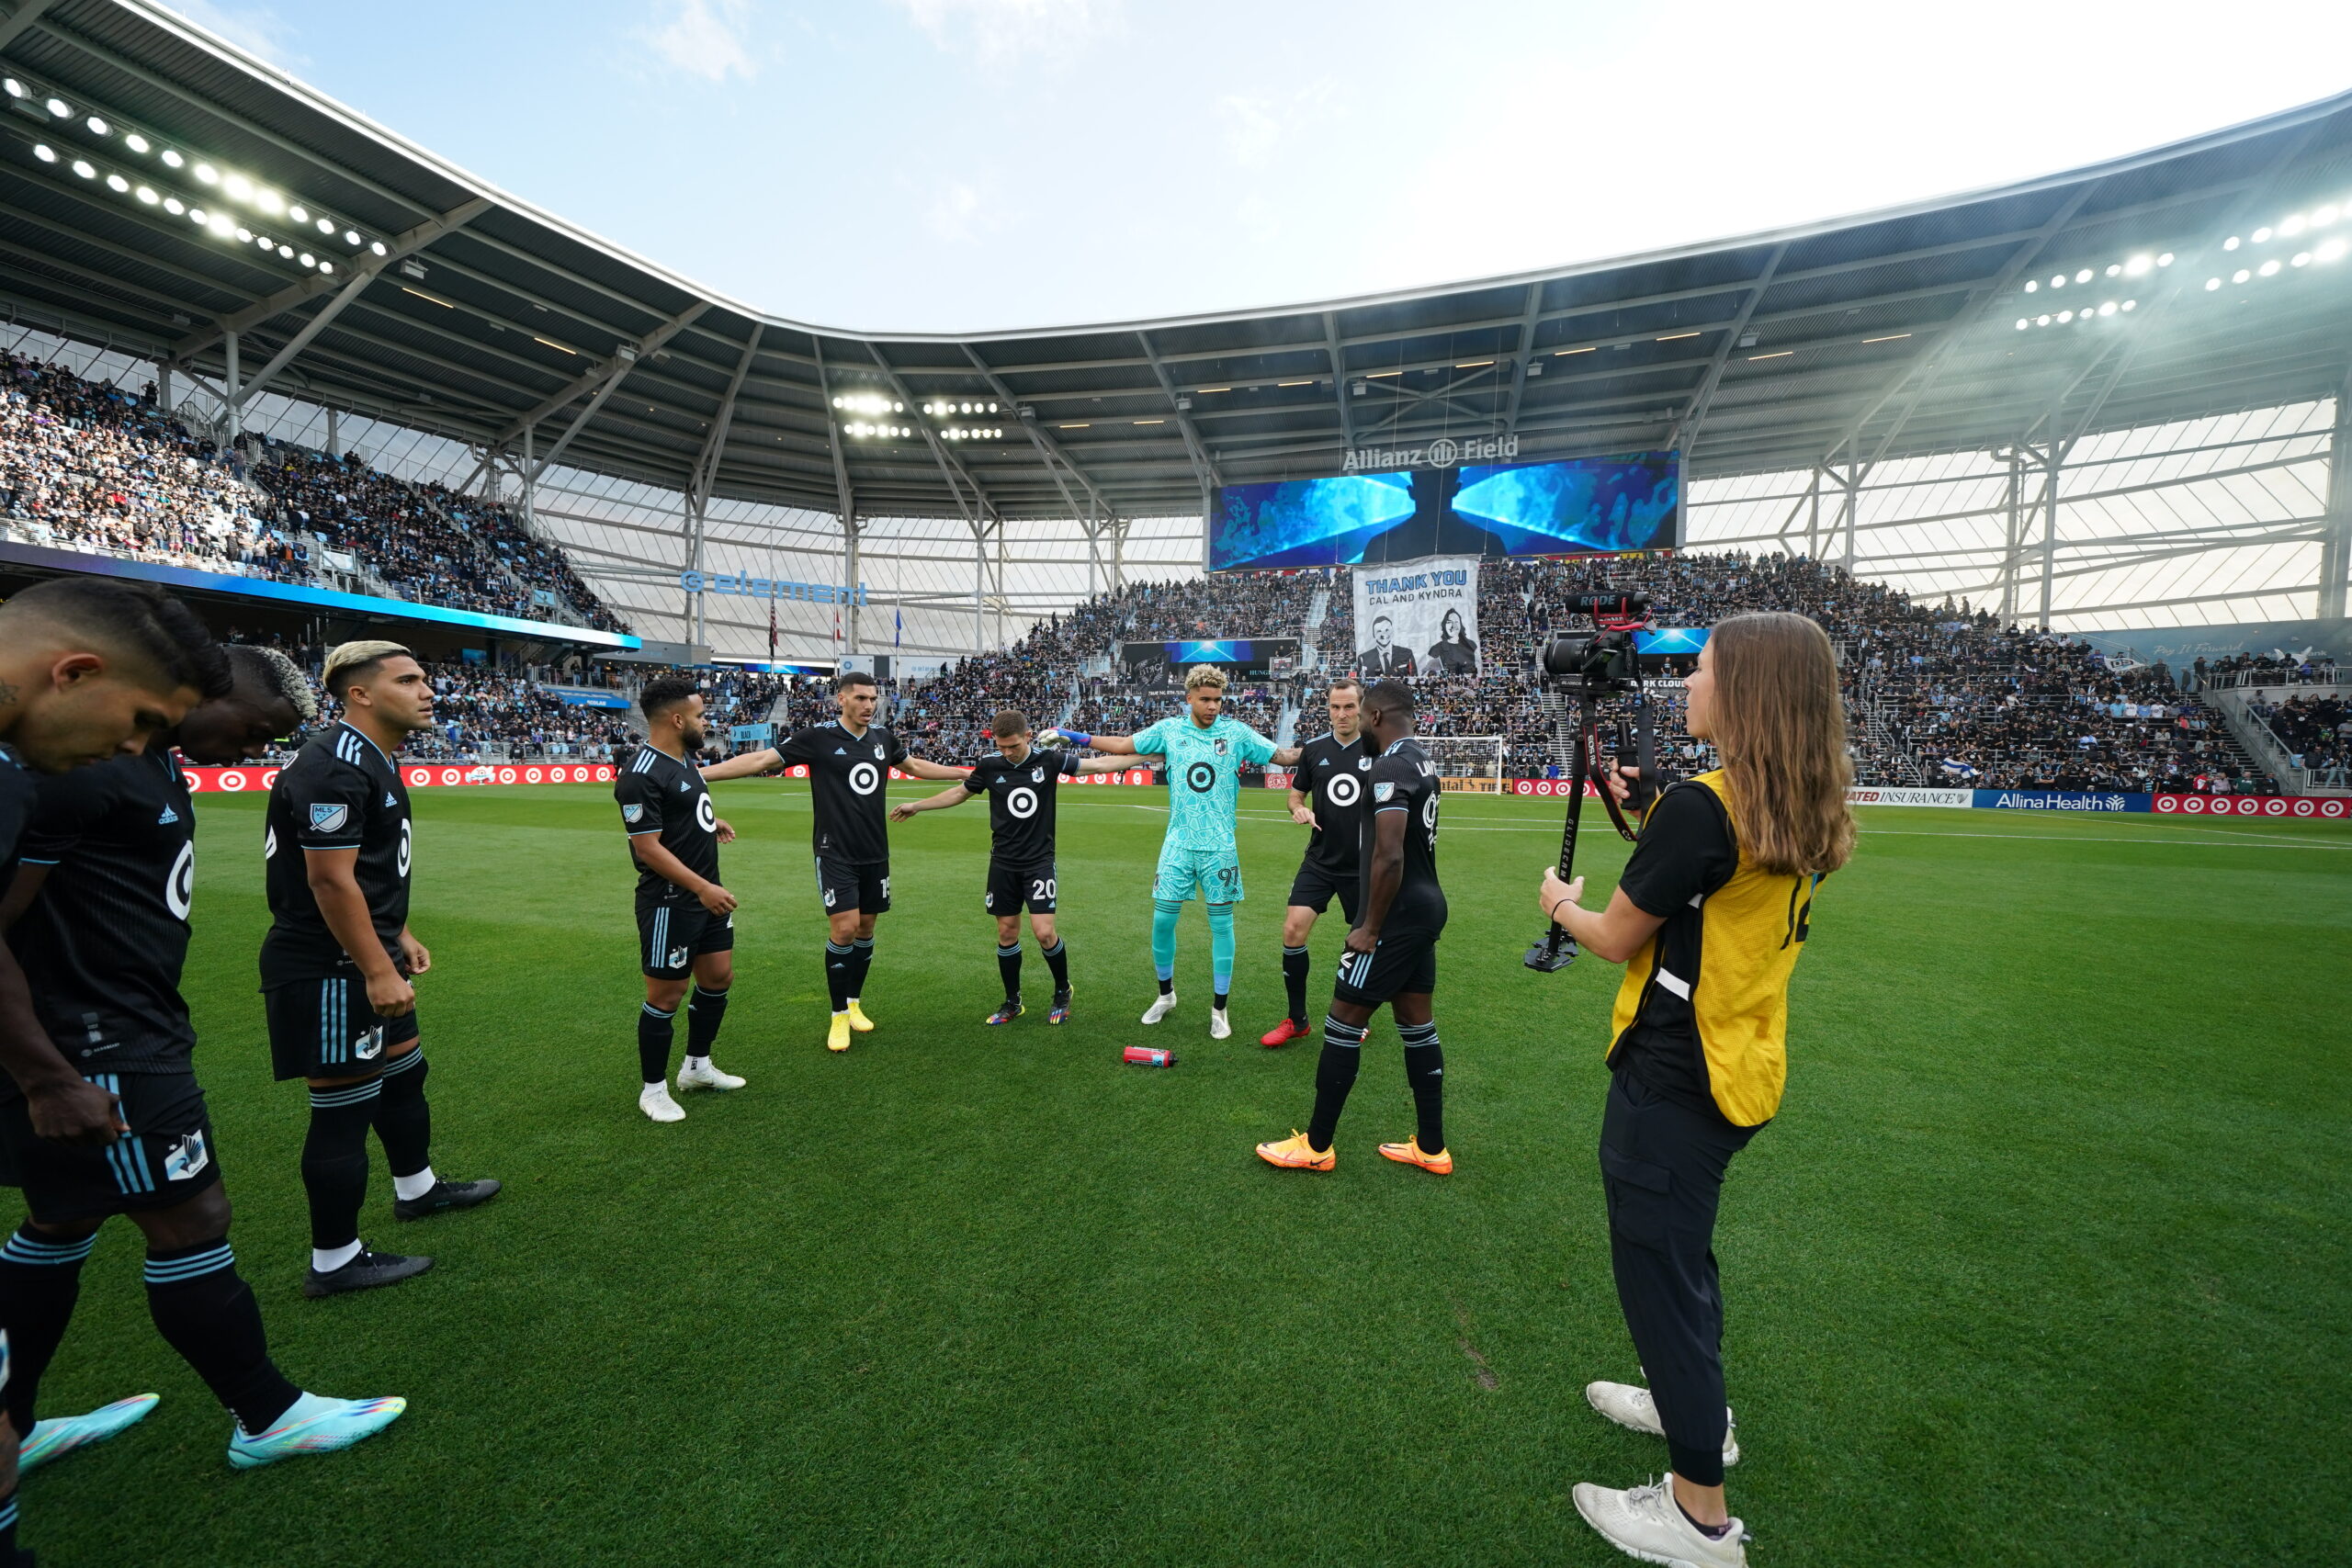 Bemidji State graduate Coley Rezabek, in yellow, shoots footage of Minnesota United players at a September 2022 game at Allianz Field in St. Paul. (Contributed)